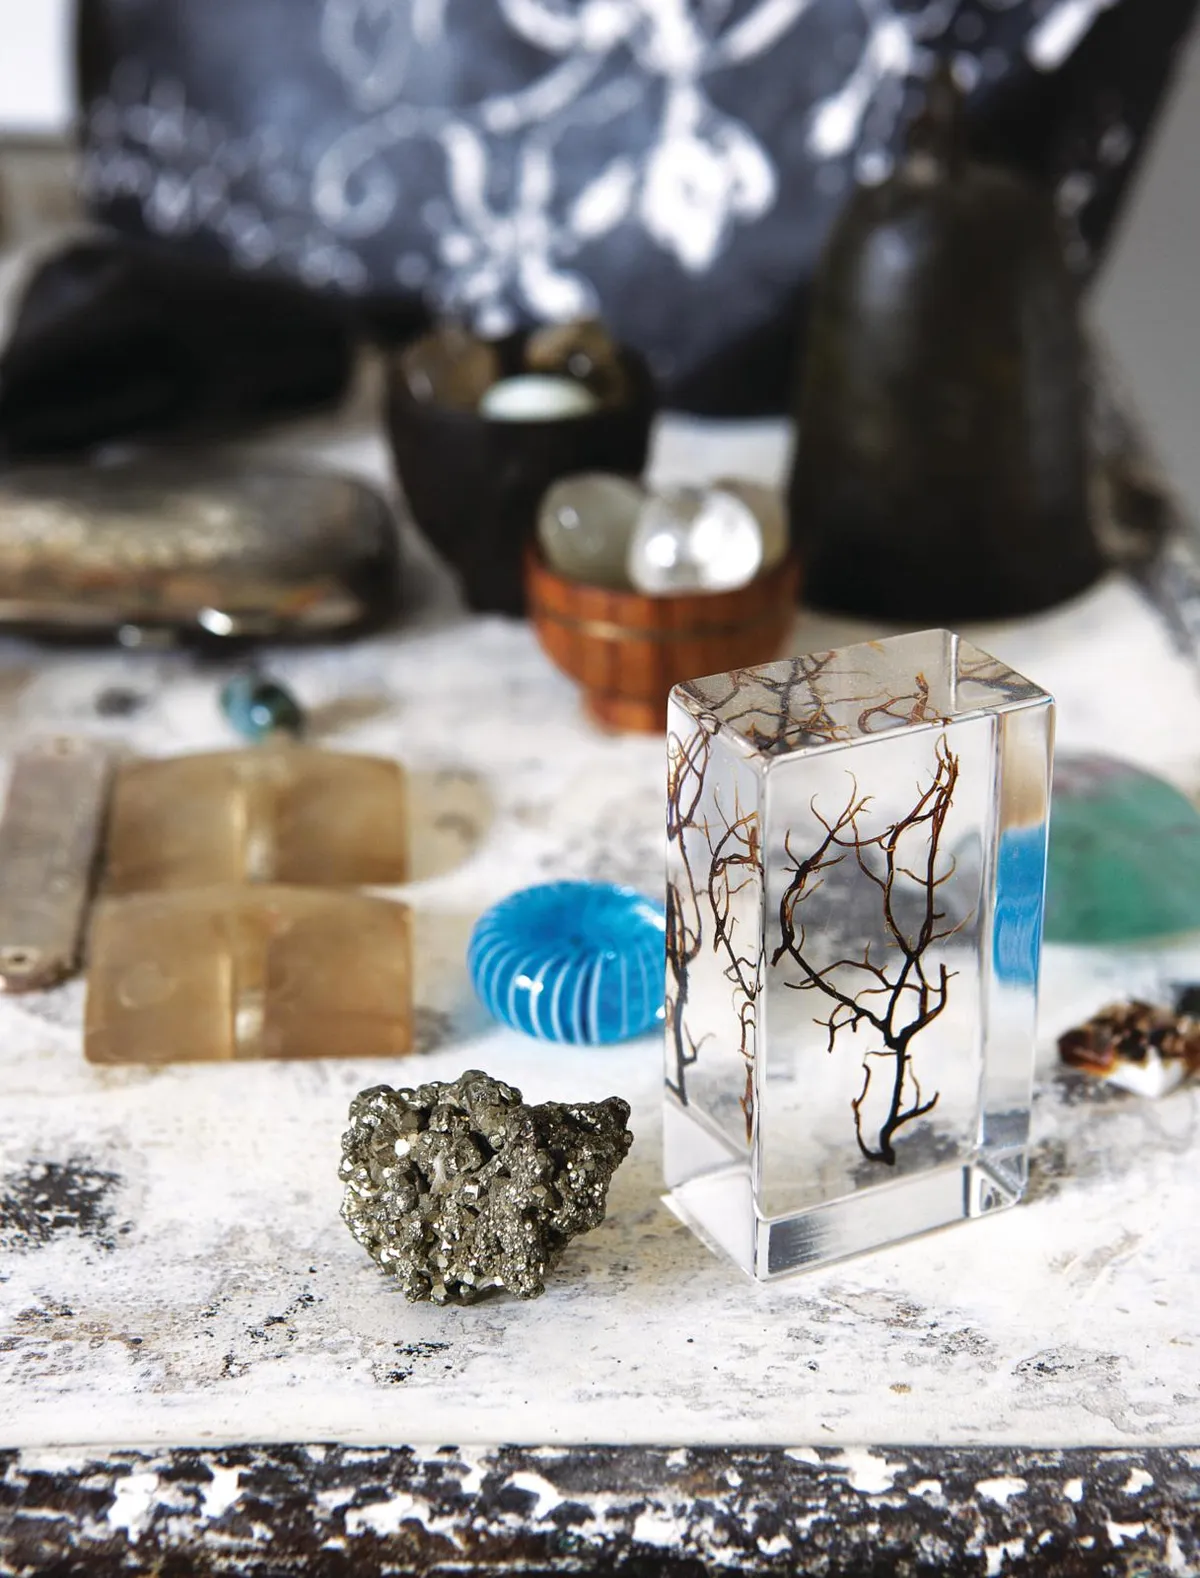 Victorian artisan cottage collection of natural curiosities and semi-precious stones